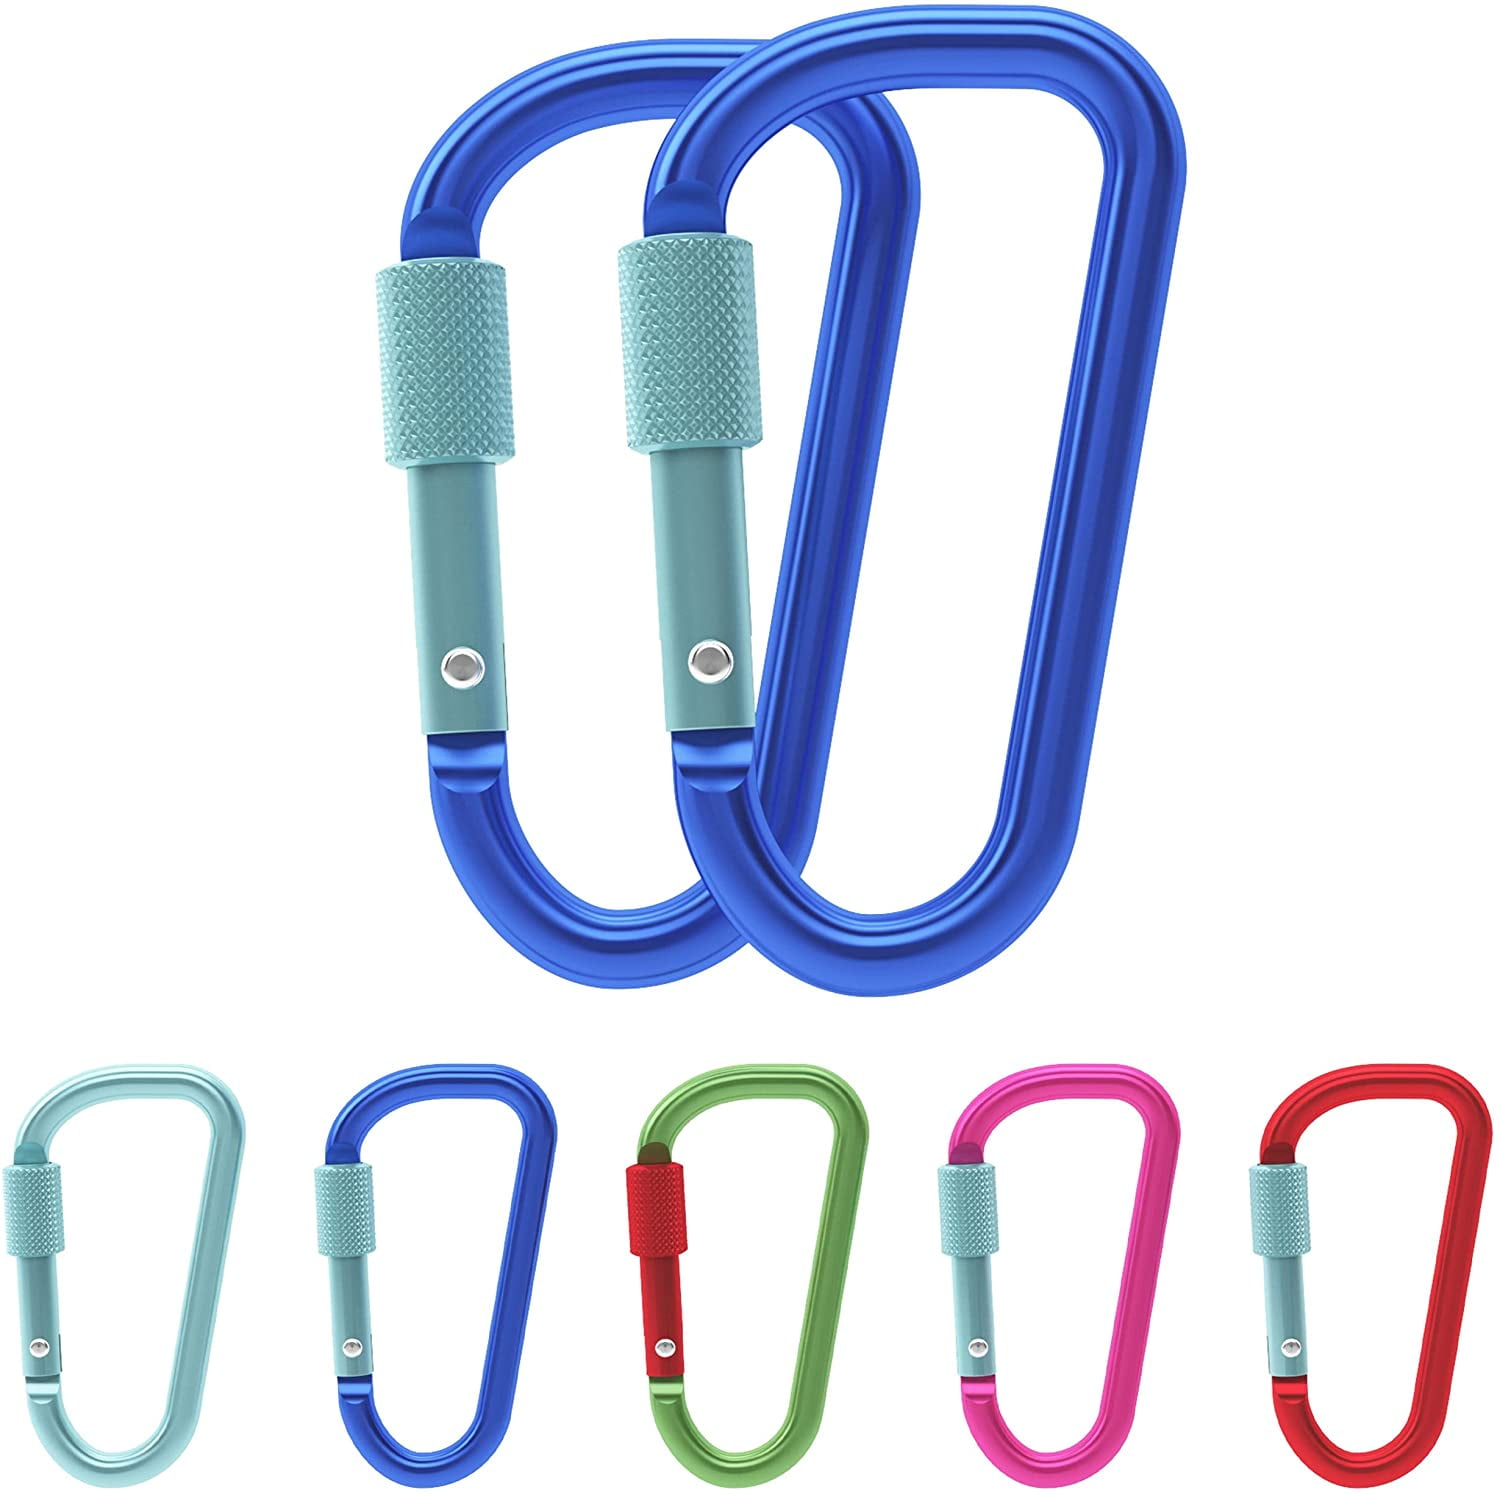 4Pcs Locking Carabiner Keychain 8Ring Quick Release Buckle Protable Quickdras6 